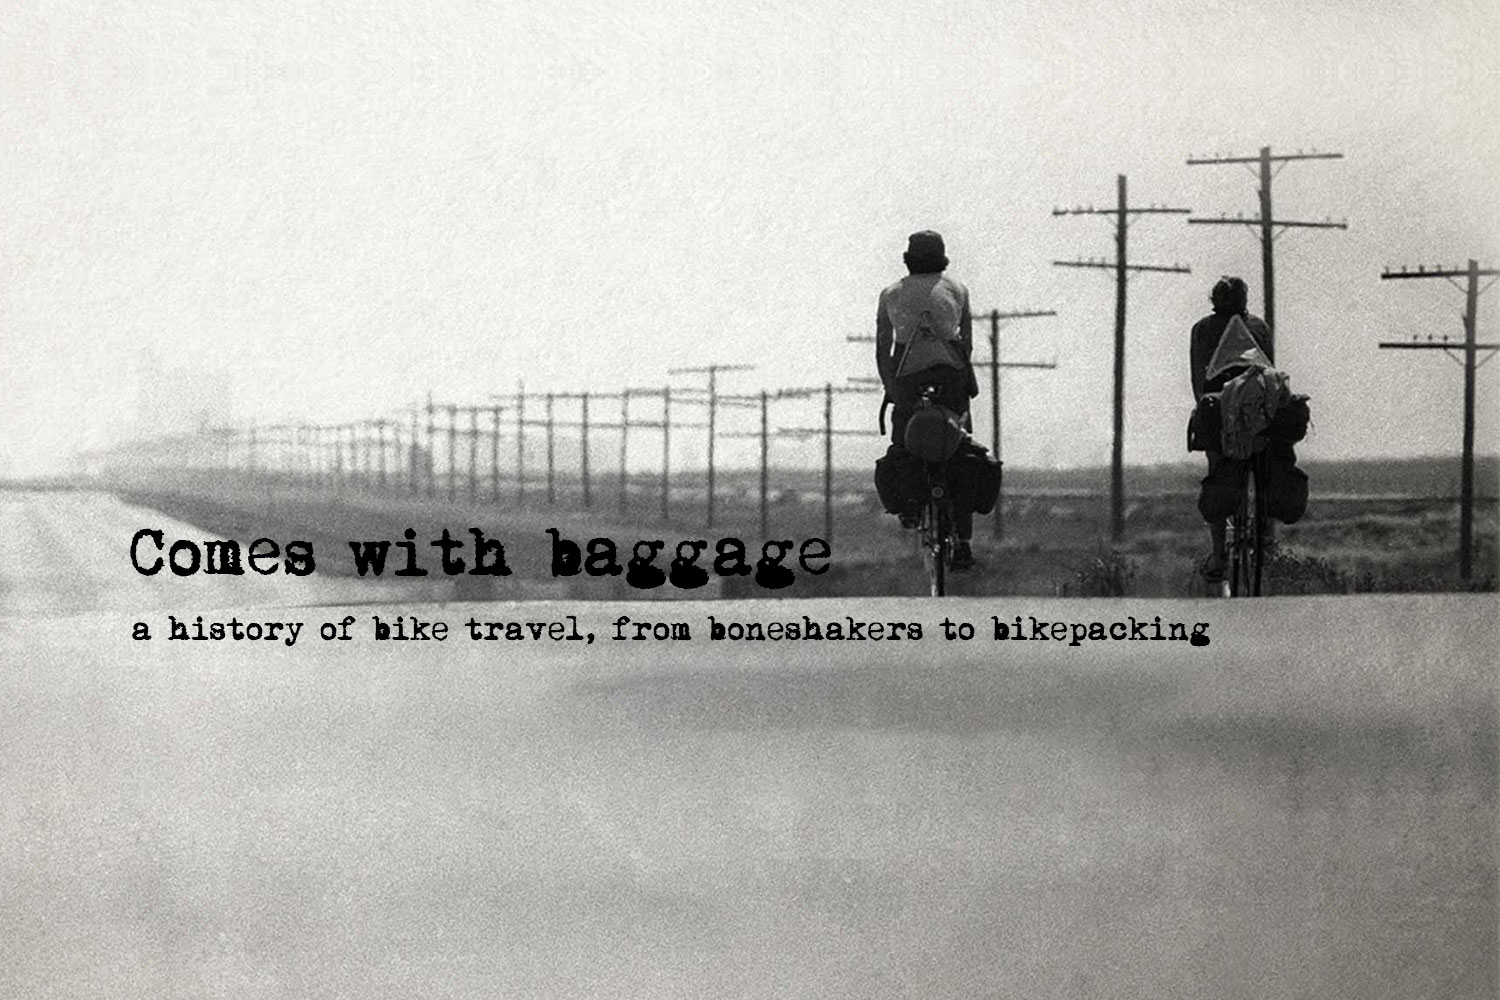 Comes with Baggage Movie, Blackburn, history of bikepacking